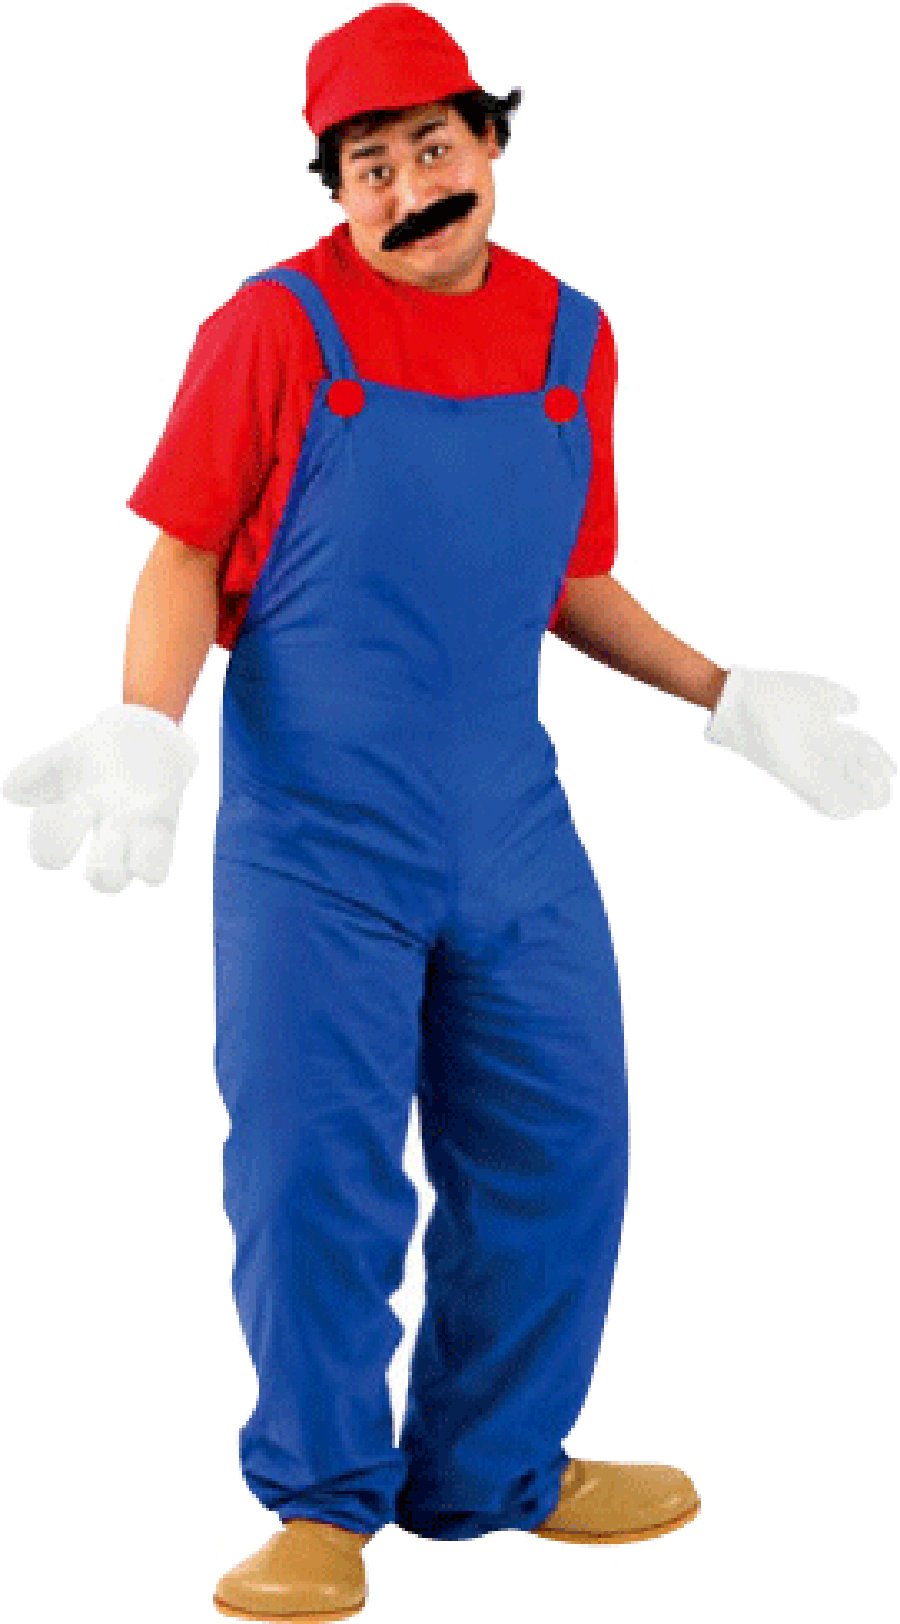 Costume Adult Plumber Red Large